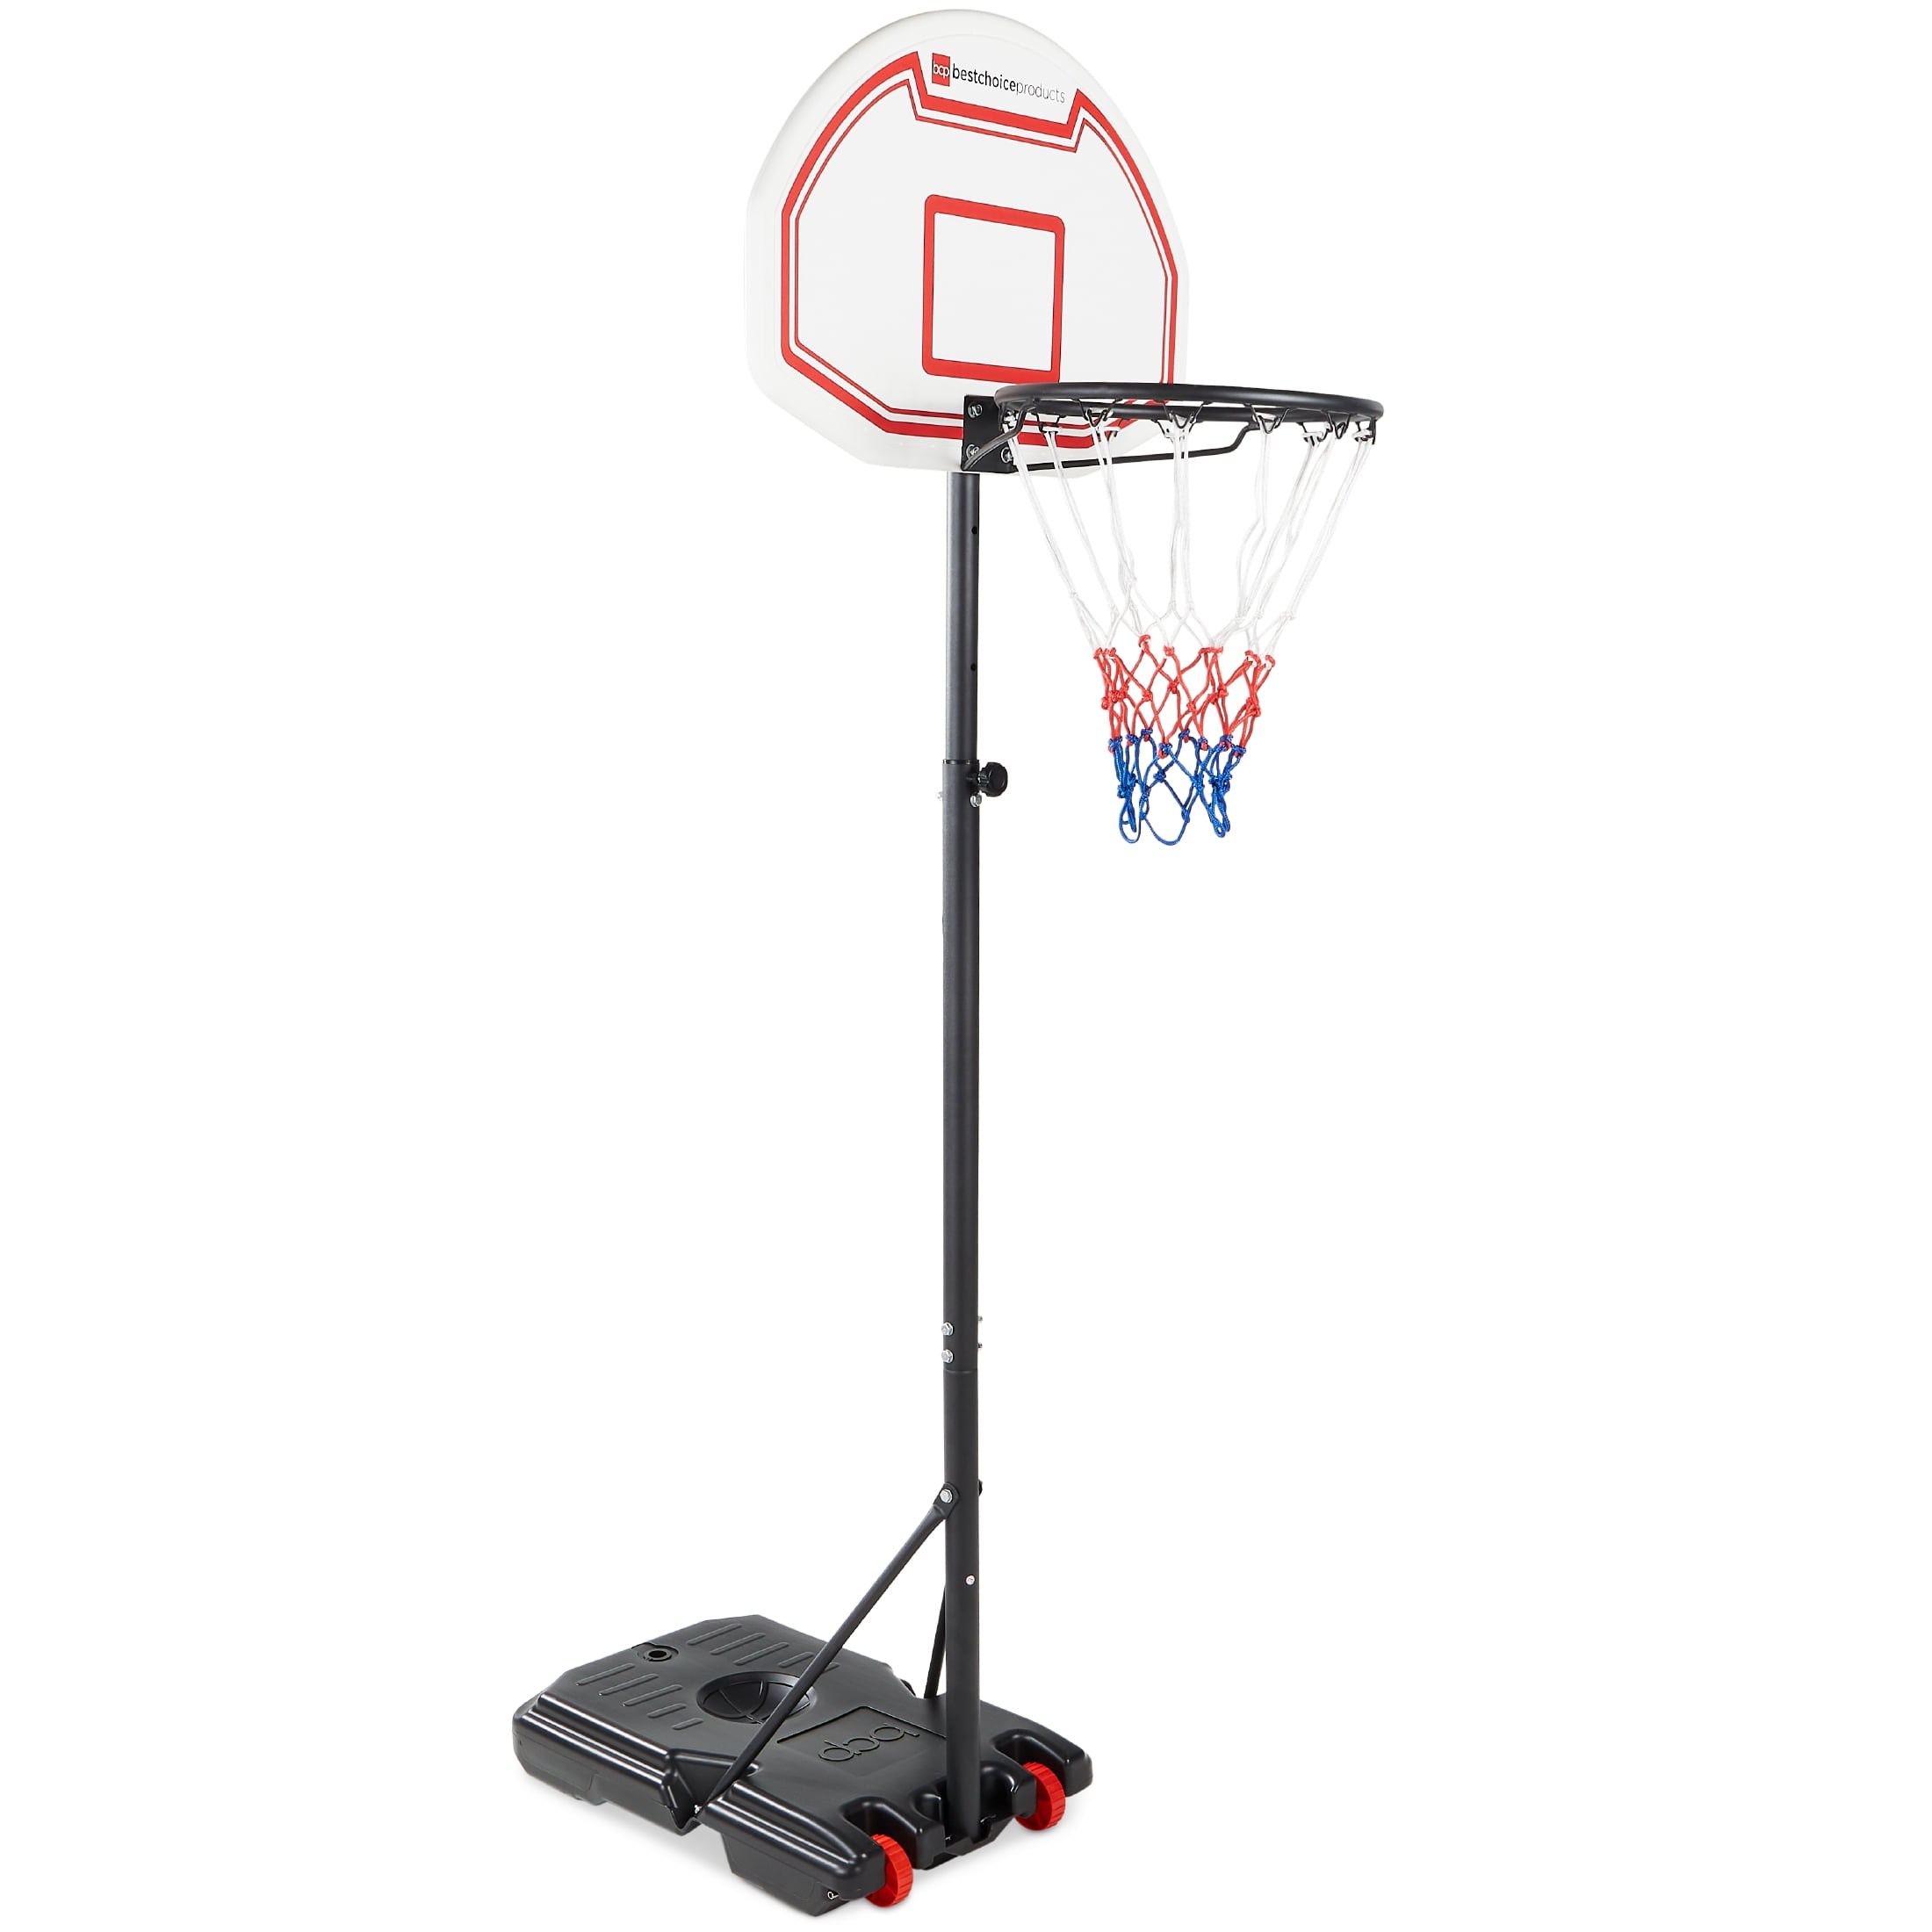 Adjustable Basketball Hoop System Stand Baby Toddler Indoor Outdoor Learning Toy 